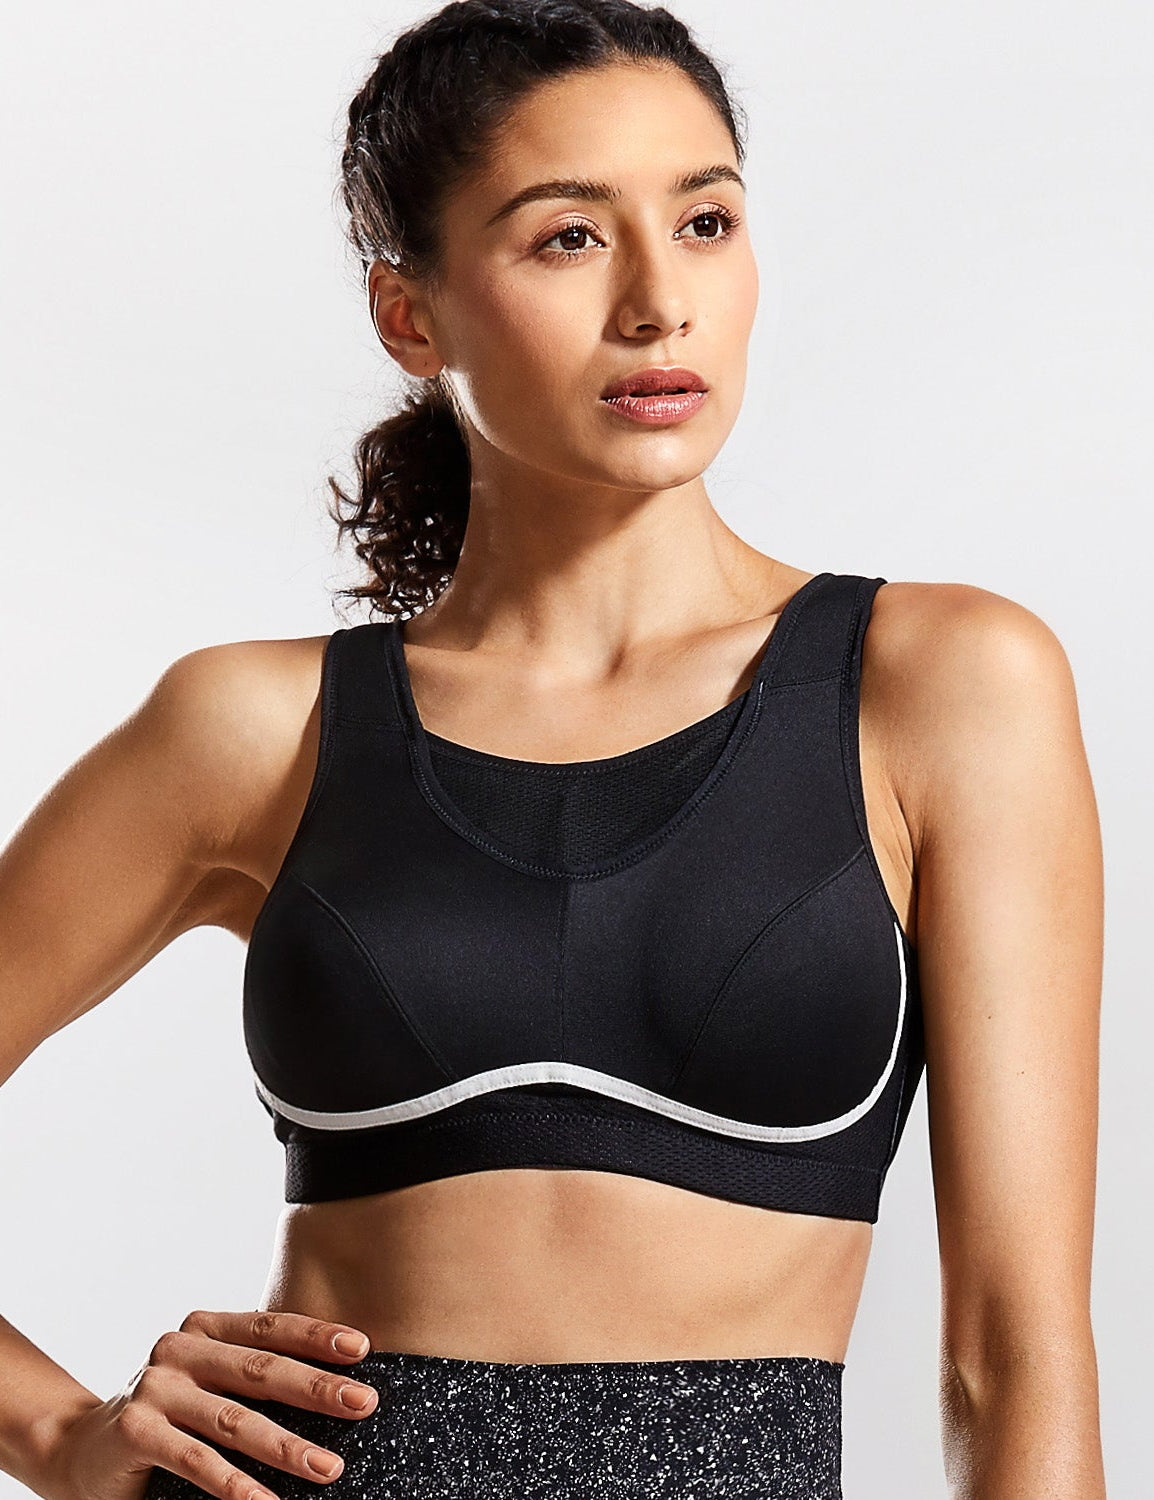 SYROKAN Women's Full Support High Impact Racerback Lightly Lined Underwire  Sports Bra Dark flower ash 95E : Buy Online at Best Price in KSA - Souq is  now : Fashion